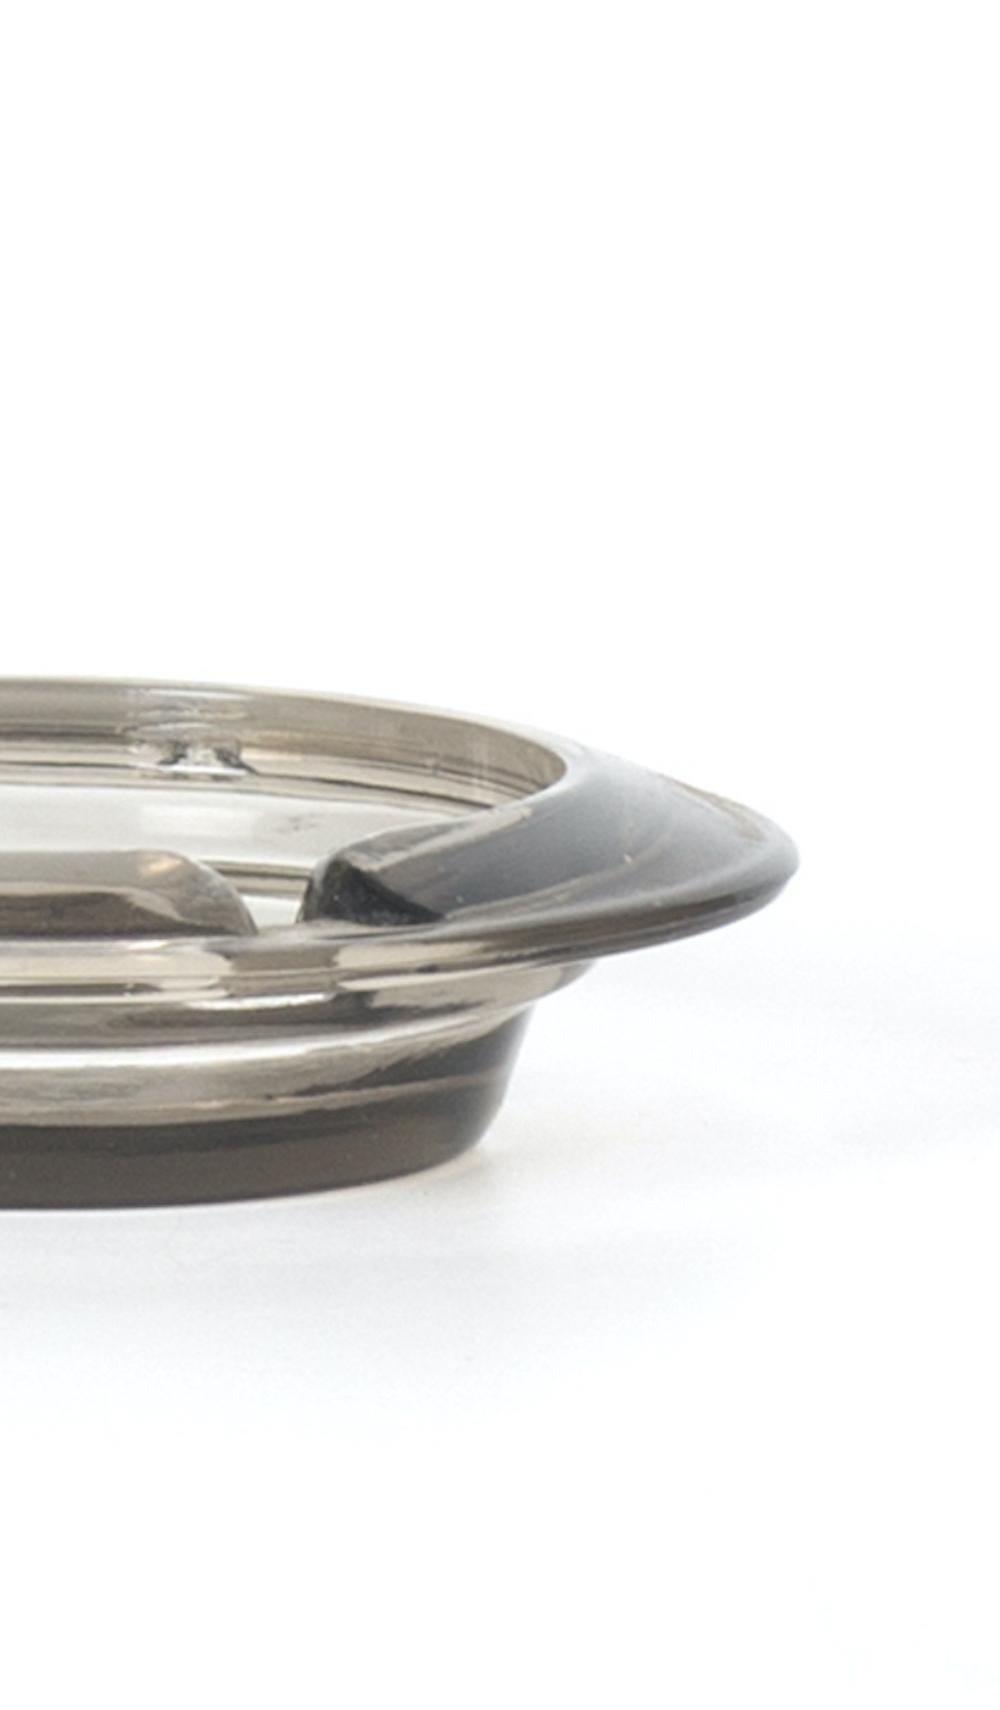 Vintage little glass ashtray is an elegant glass decorative object, realized during the 1970s. 

Glass little ashtray perfect for your home.